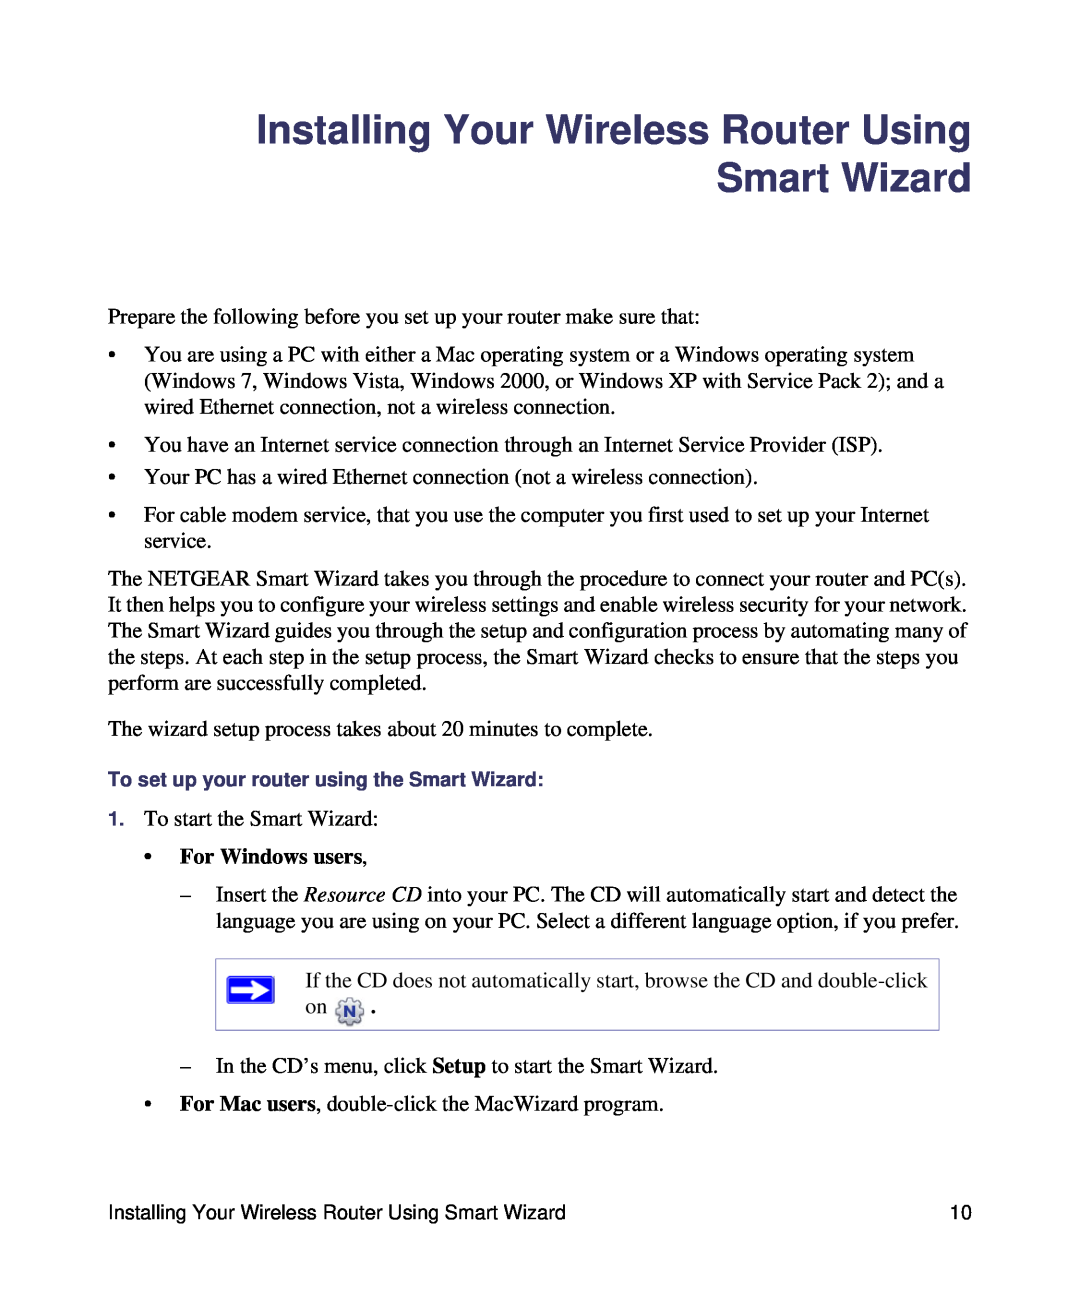 NETGEAR WNDR3400-100NAS manual Installing Your Wireless Router Using Smart Wizard, For Windows users 